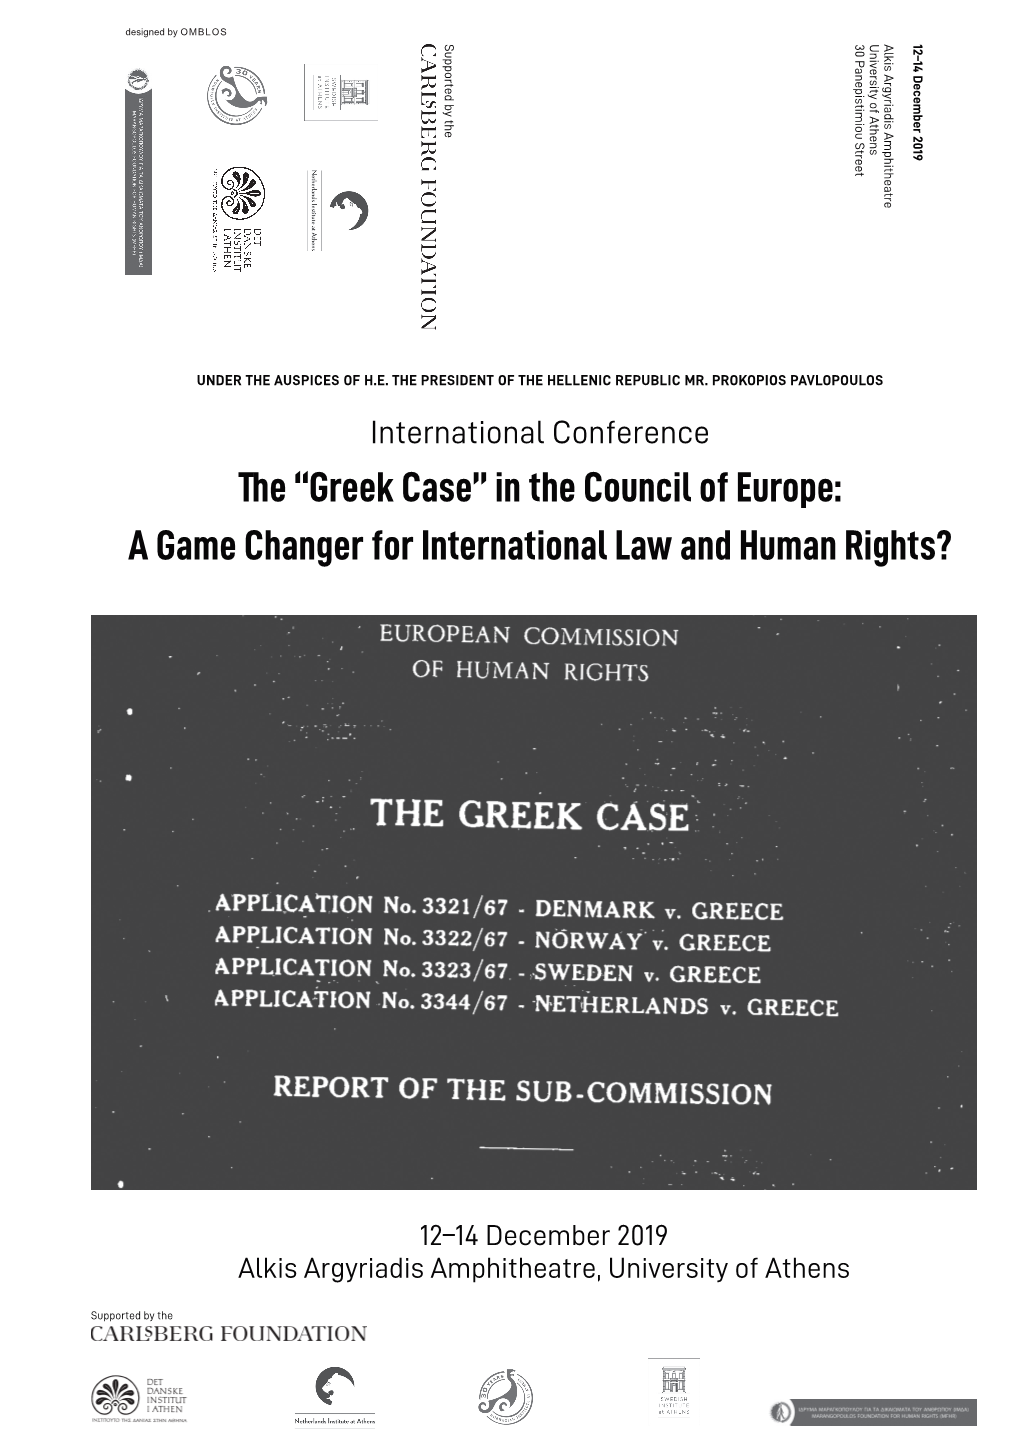 The “Greek Case” in the Council of Europe: a Game Changer for International Law and Human Rights?